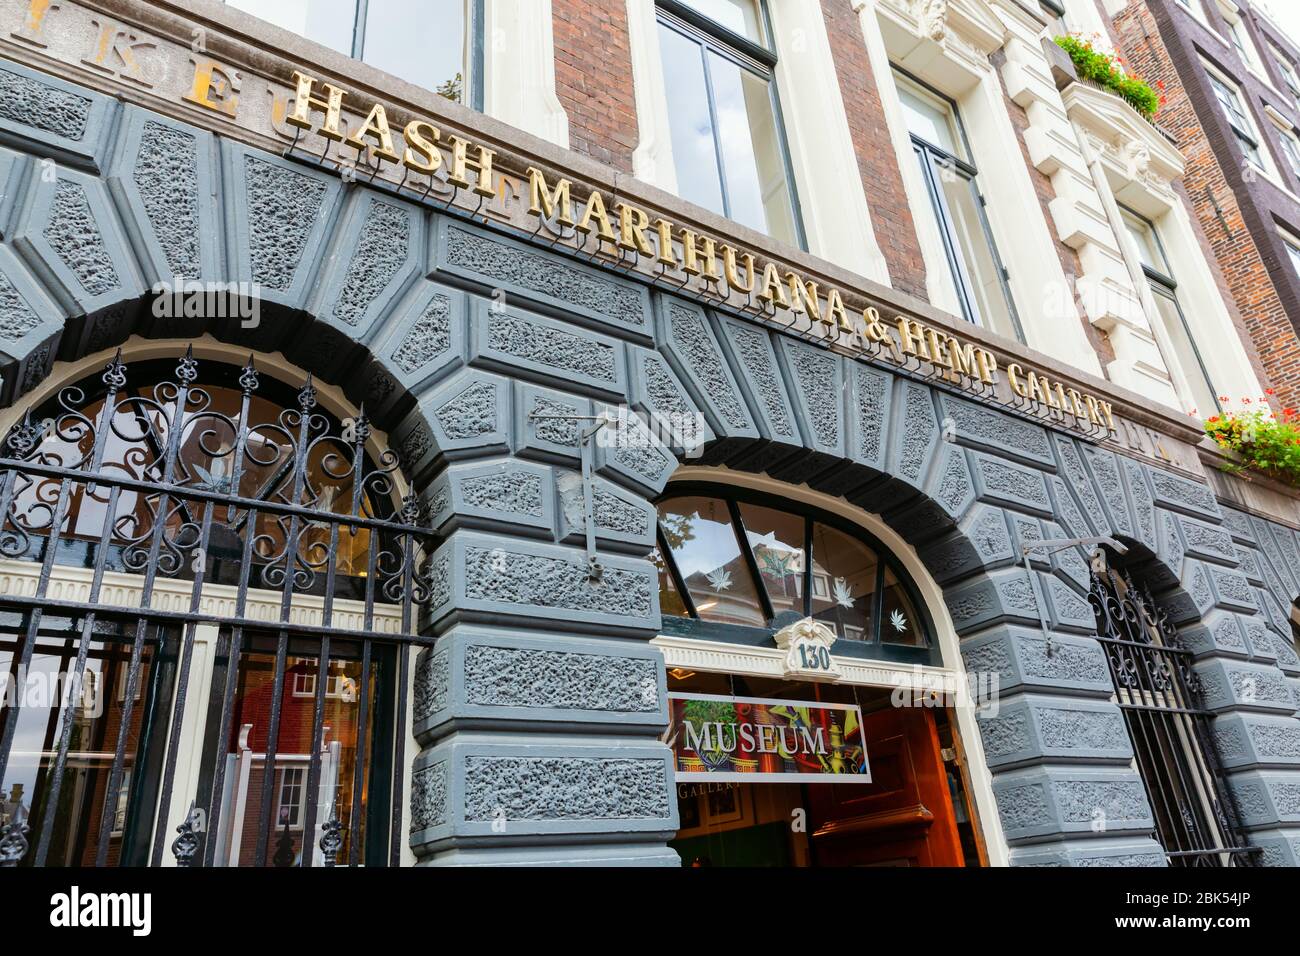 Amsterdam, Netherlands - October 28, 2019: Hash, Marihuana and Hemp Museum in Amsterdam. It offers information to historical and modern uses of cannab Stock Photo